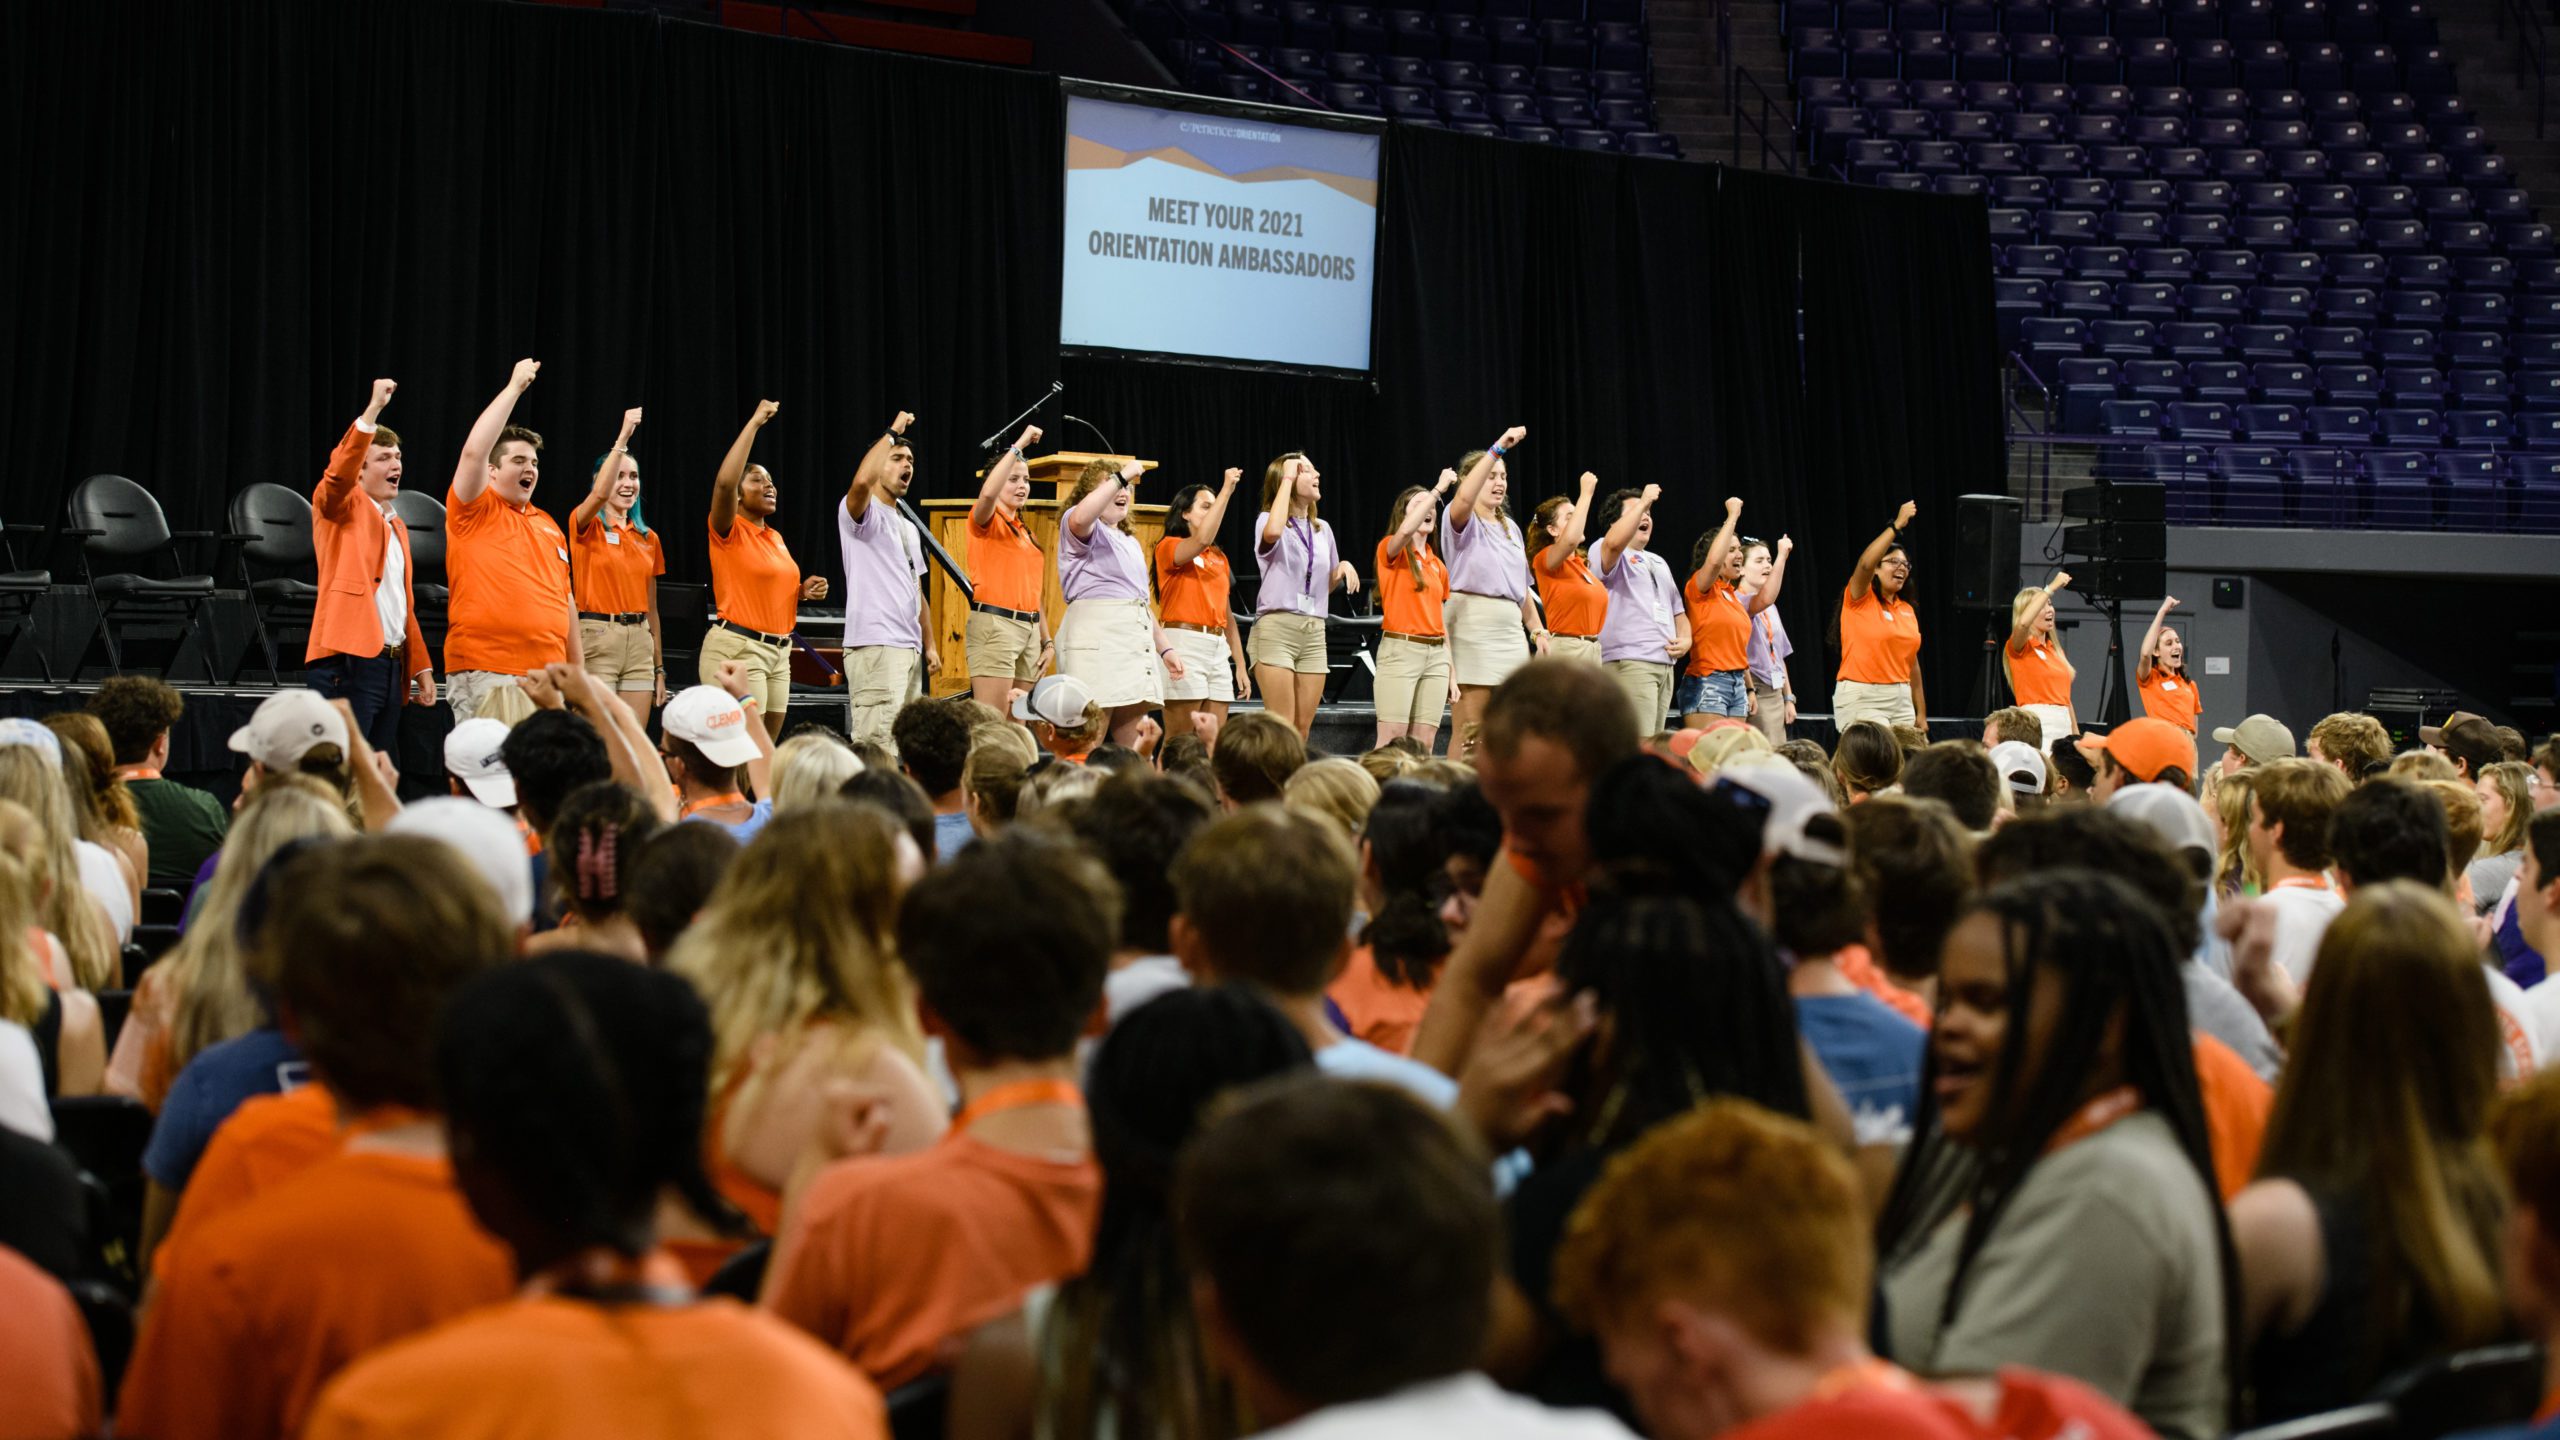 Orientation Ambassadors lead new students through Convocation in August 2021